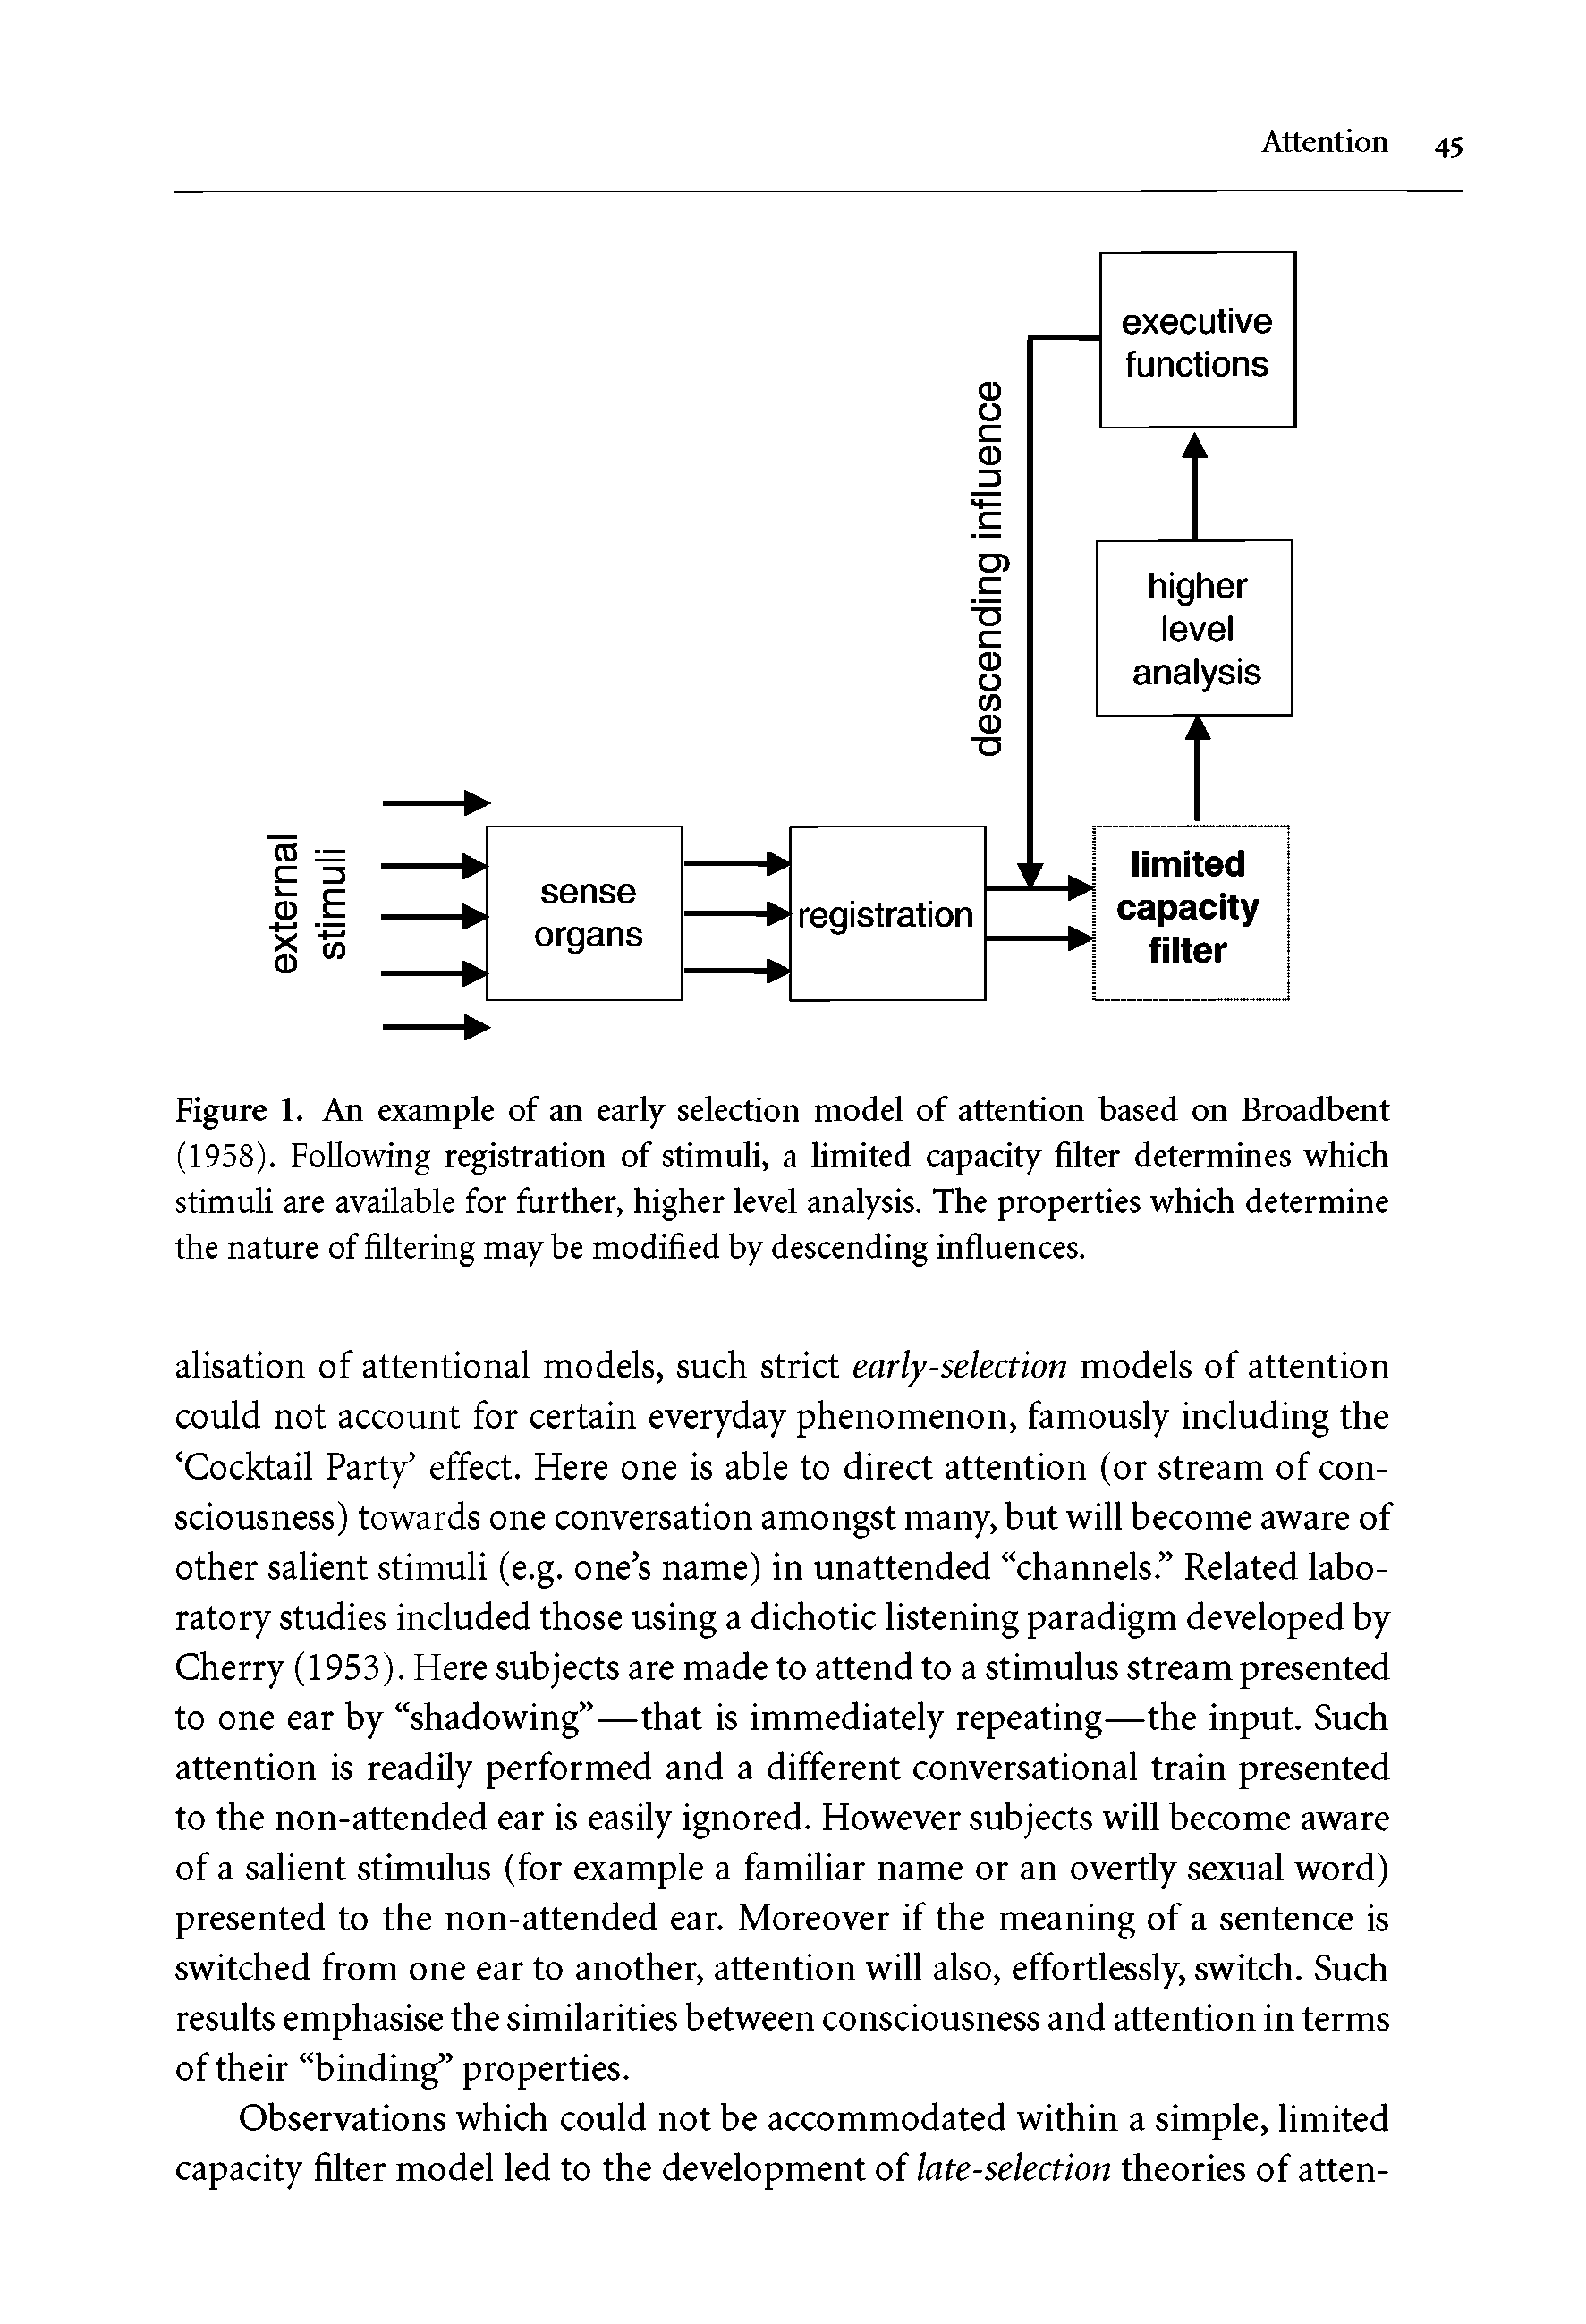 Figure 1. An example of an early selection model of attention based on Broadbent (1958). Following registration of stimuli, a limited capacity filter determines which stimuli are available for further, higher level analysis. The properties which determine the nature of filtering may be modified by descending influences.